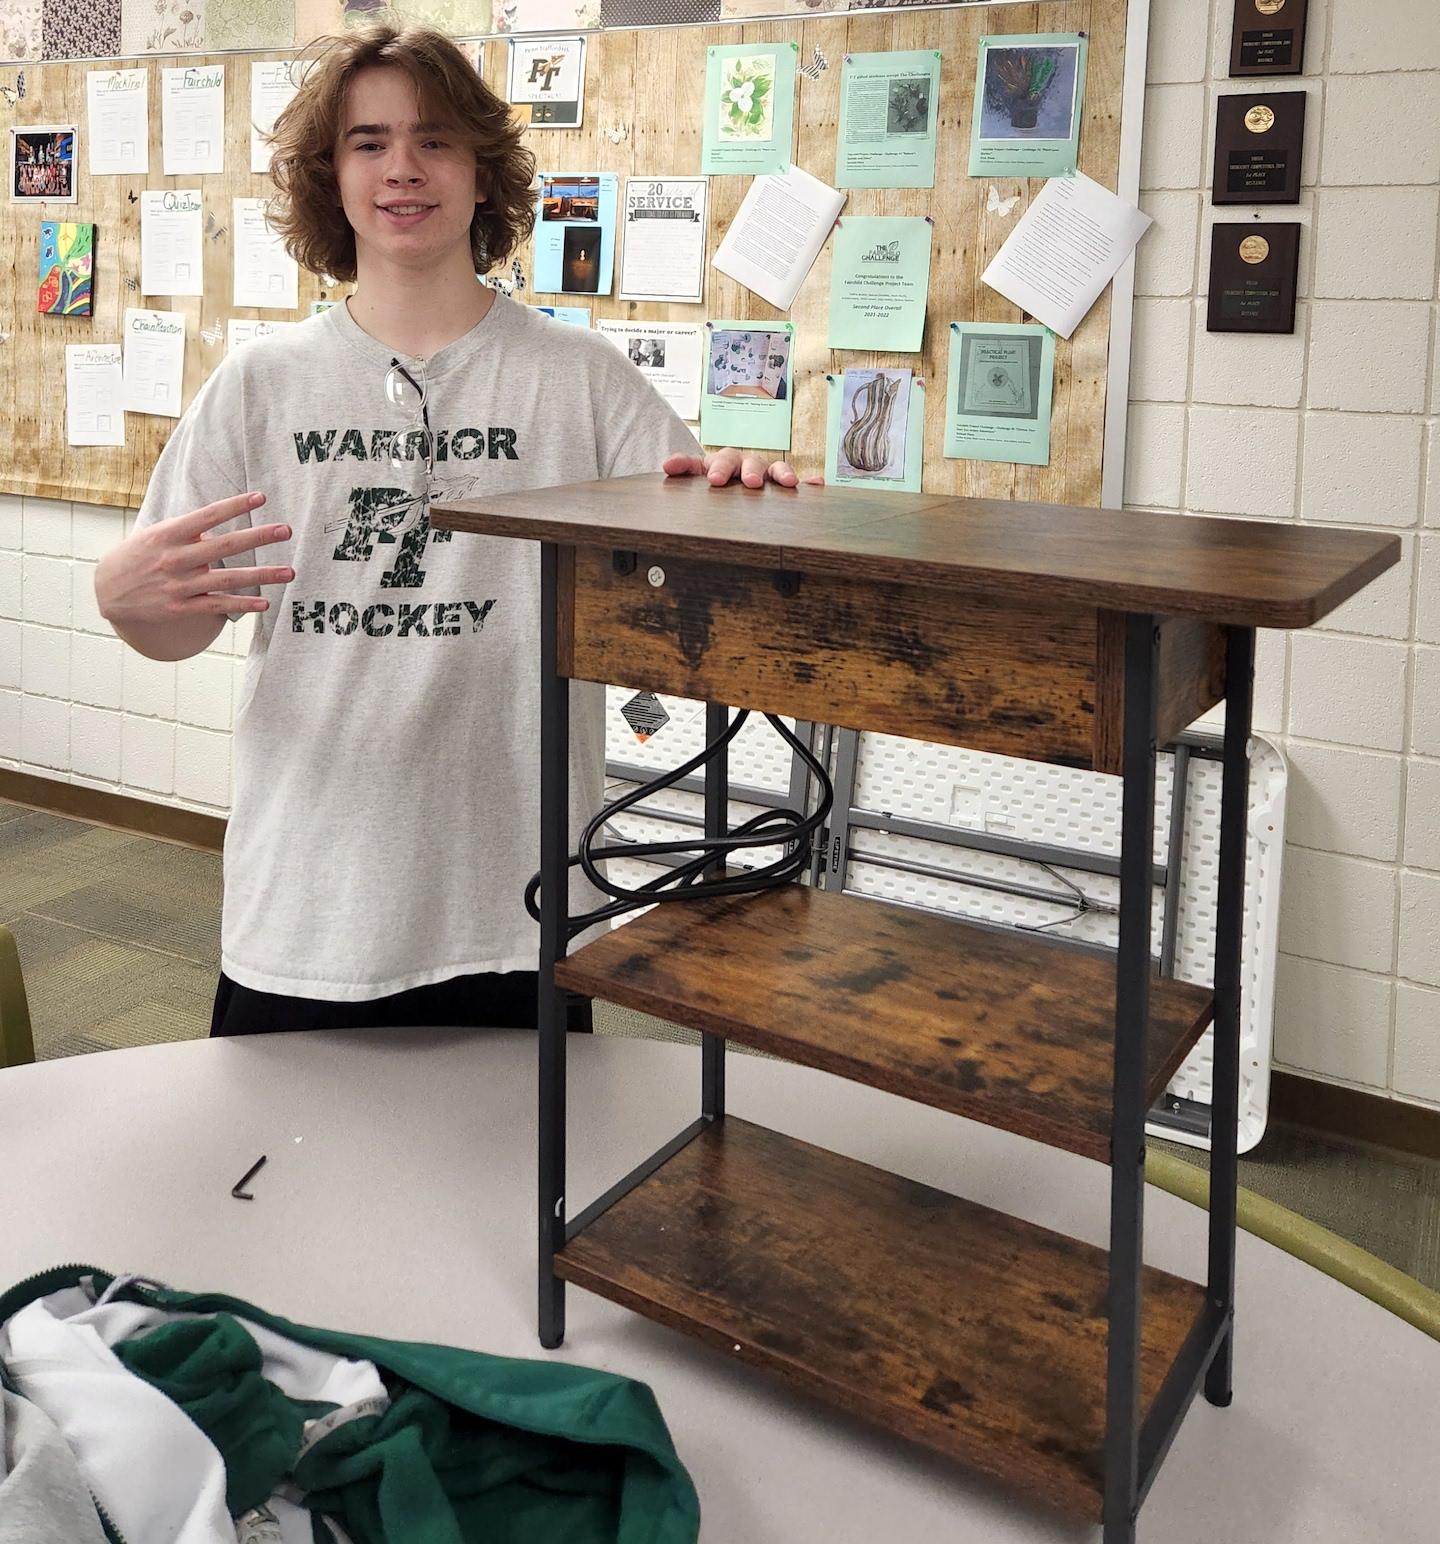 Landon Doonan helped to assemble a new table for the reading space